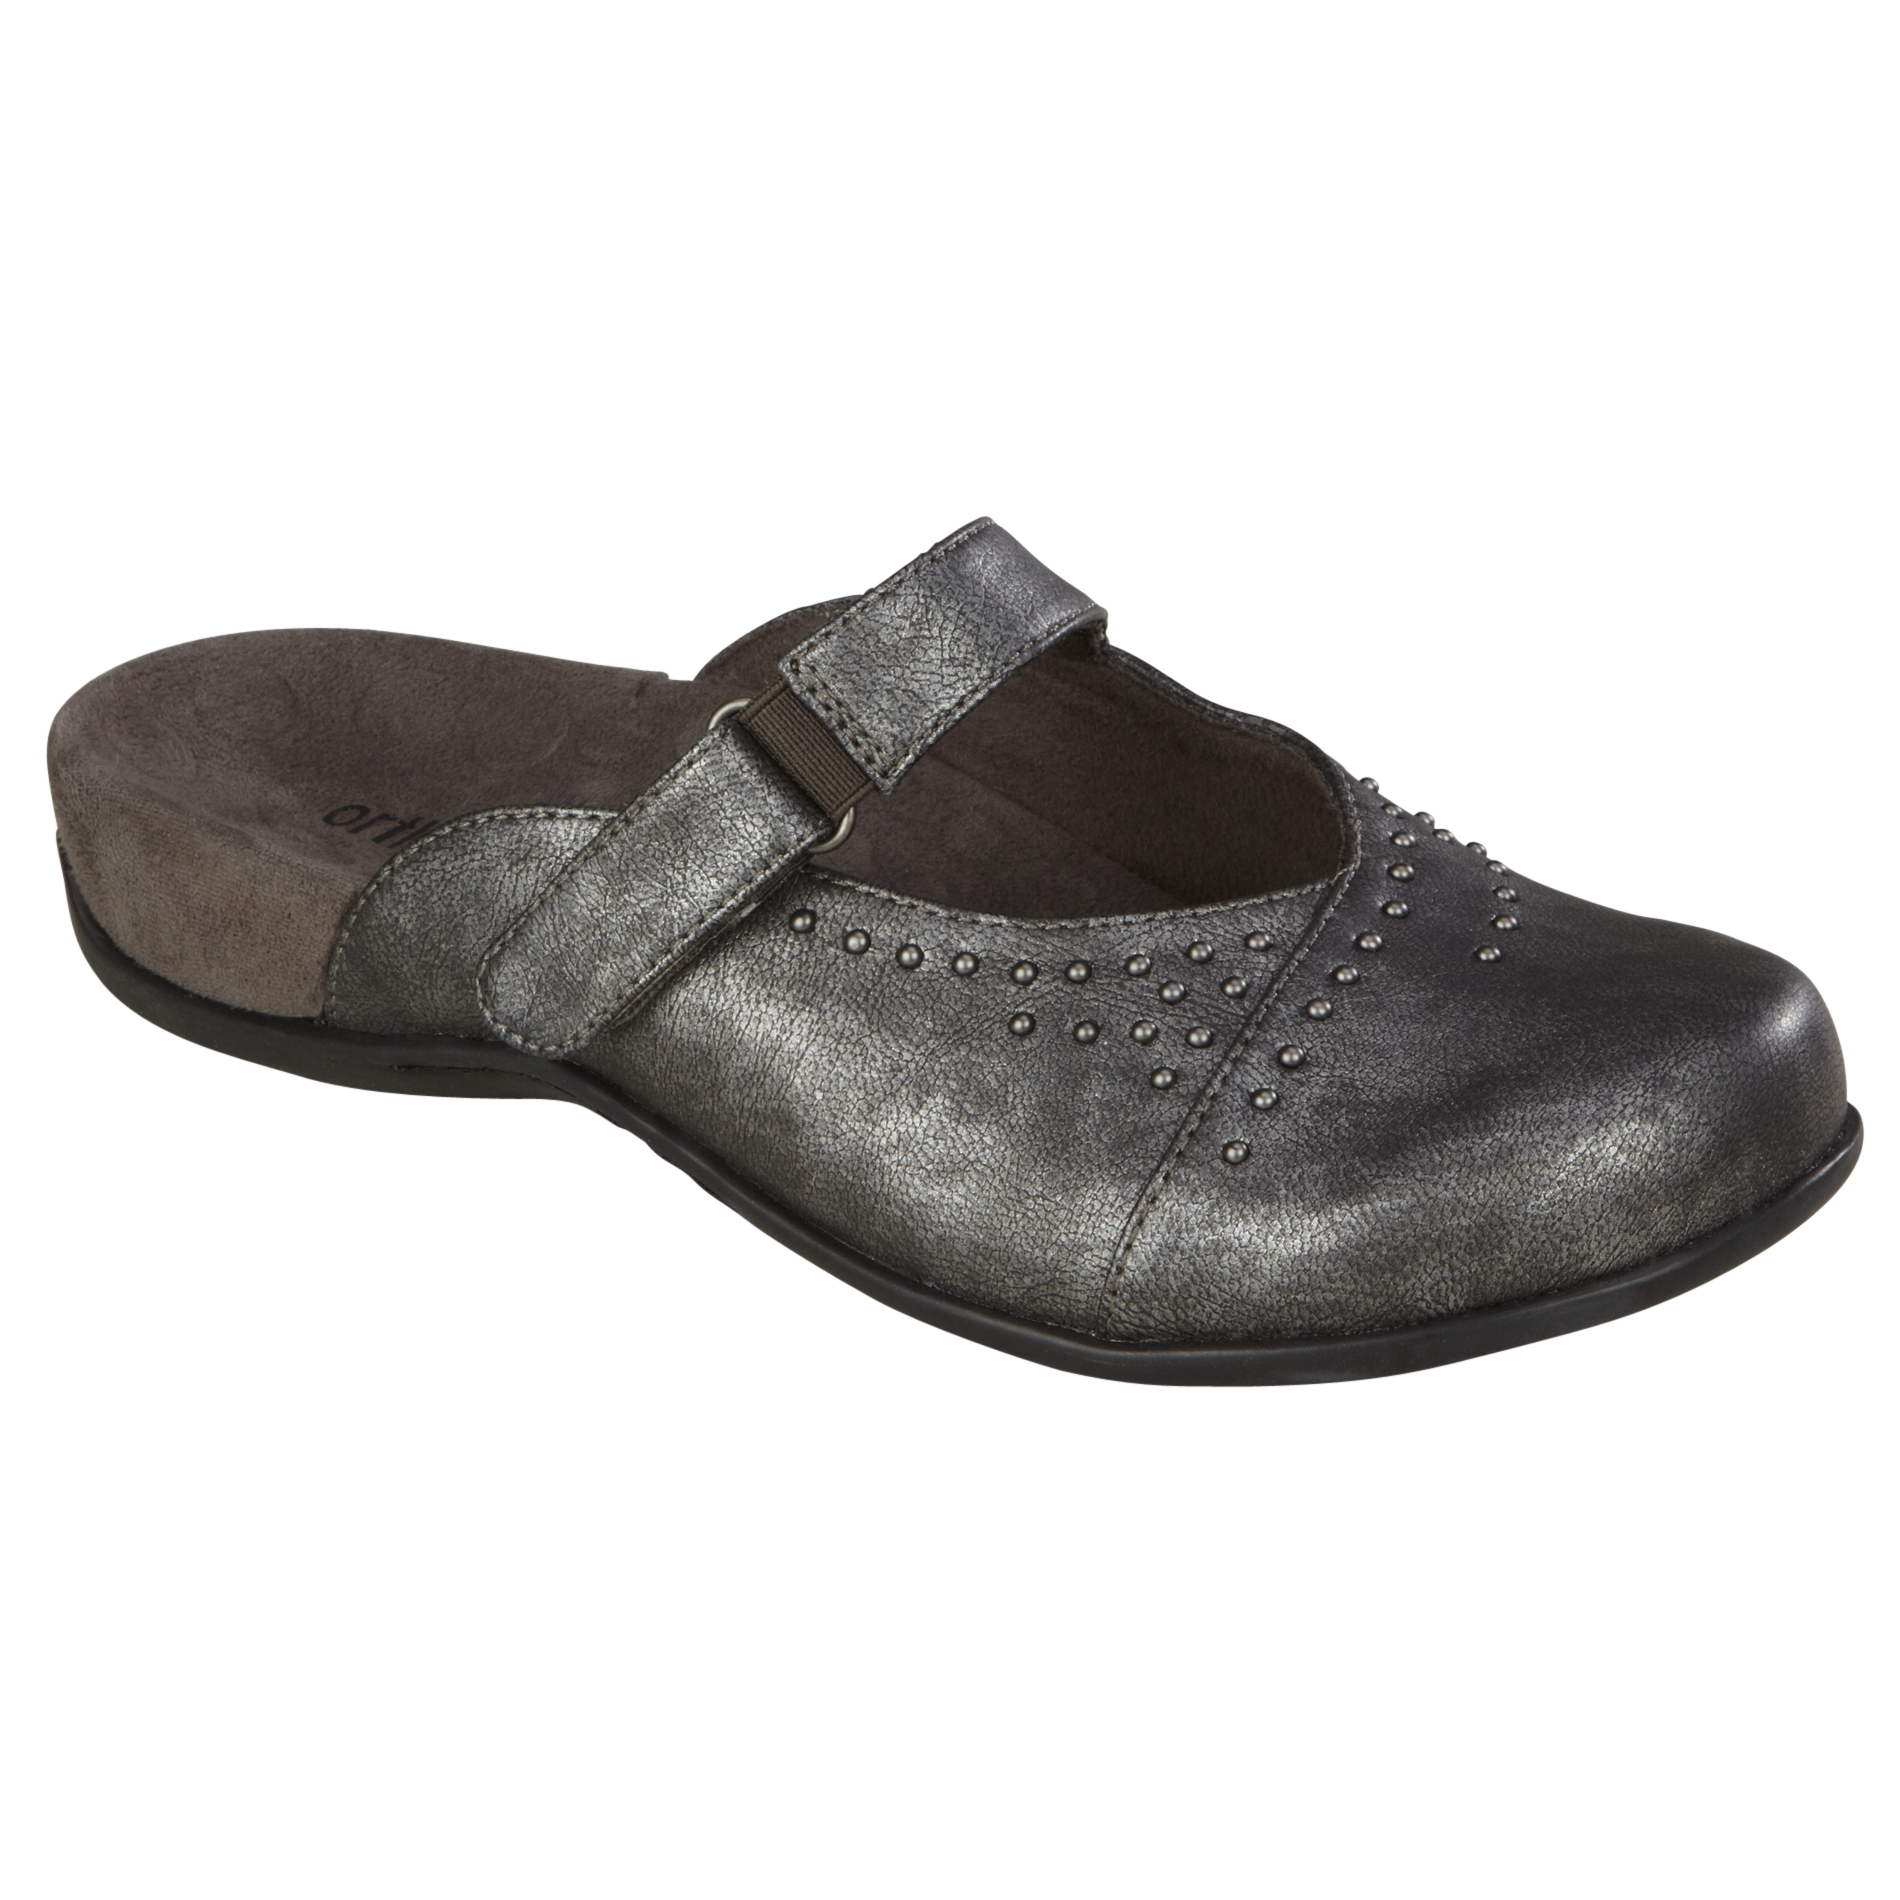 Vionic with Orthaheel Technology Women's Casual Shoe - AIRLIE - Pewter